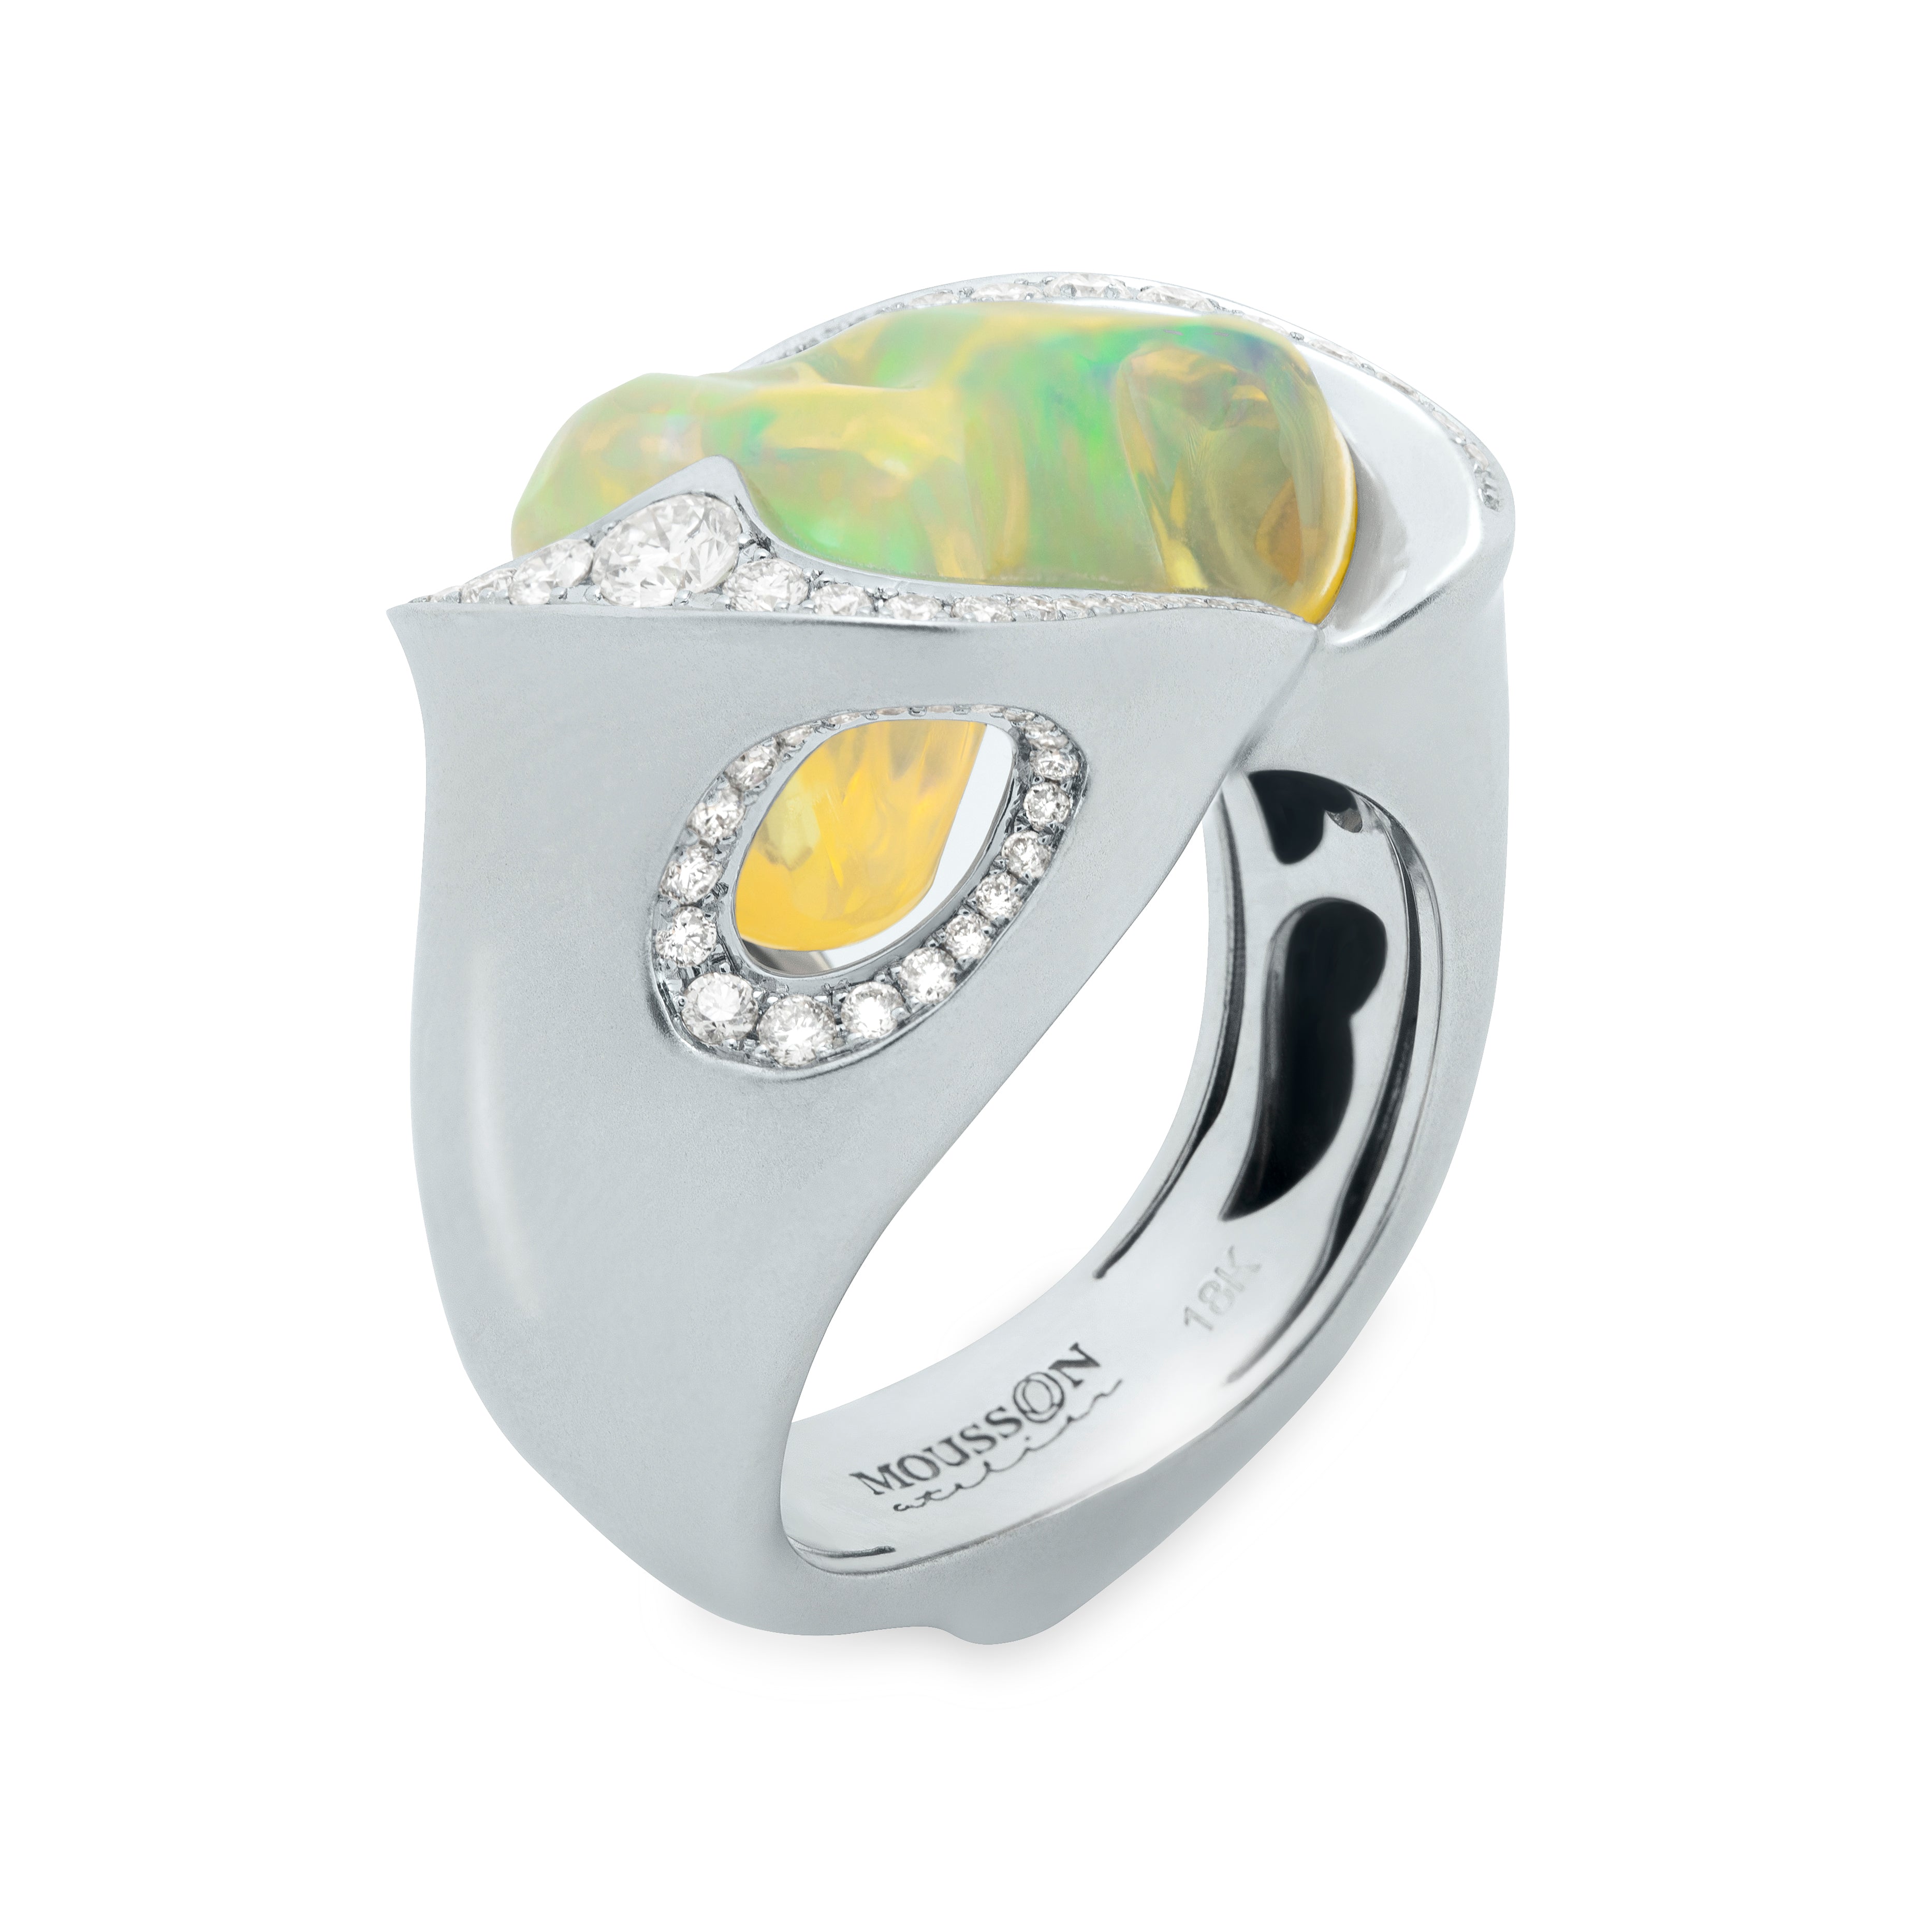 R 0028-0 18K White Gold, Mexican Fire Opal, Diamonds Ring